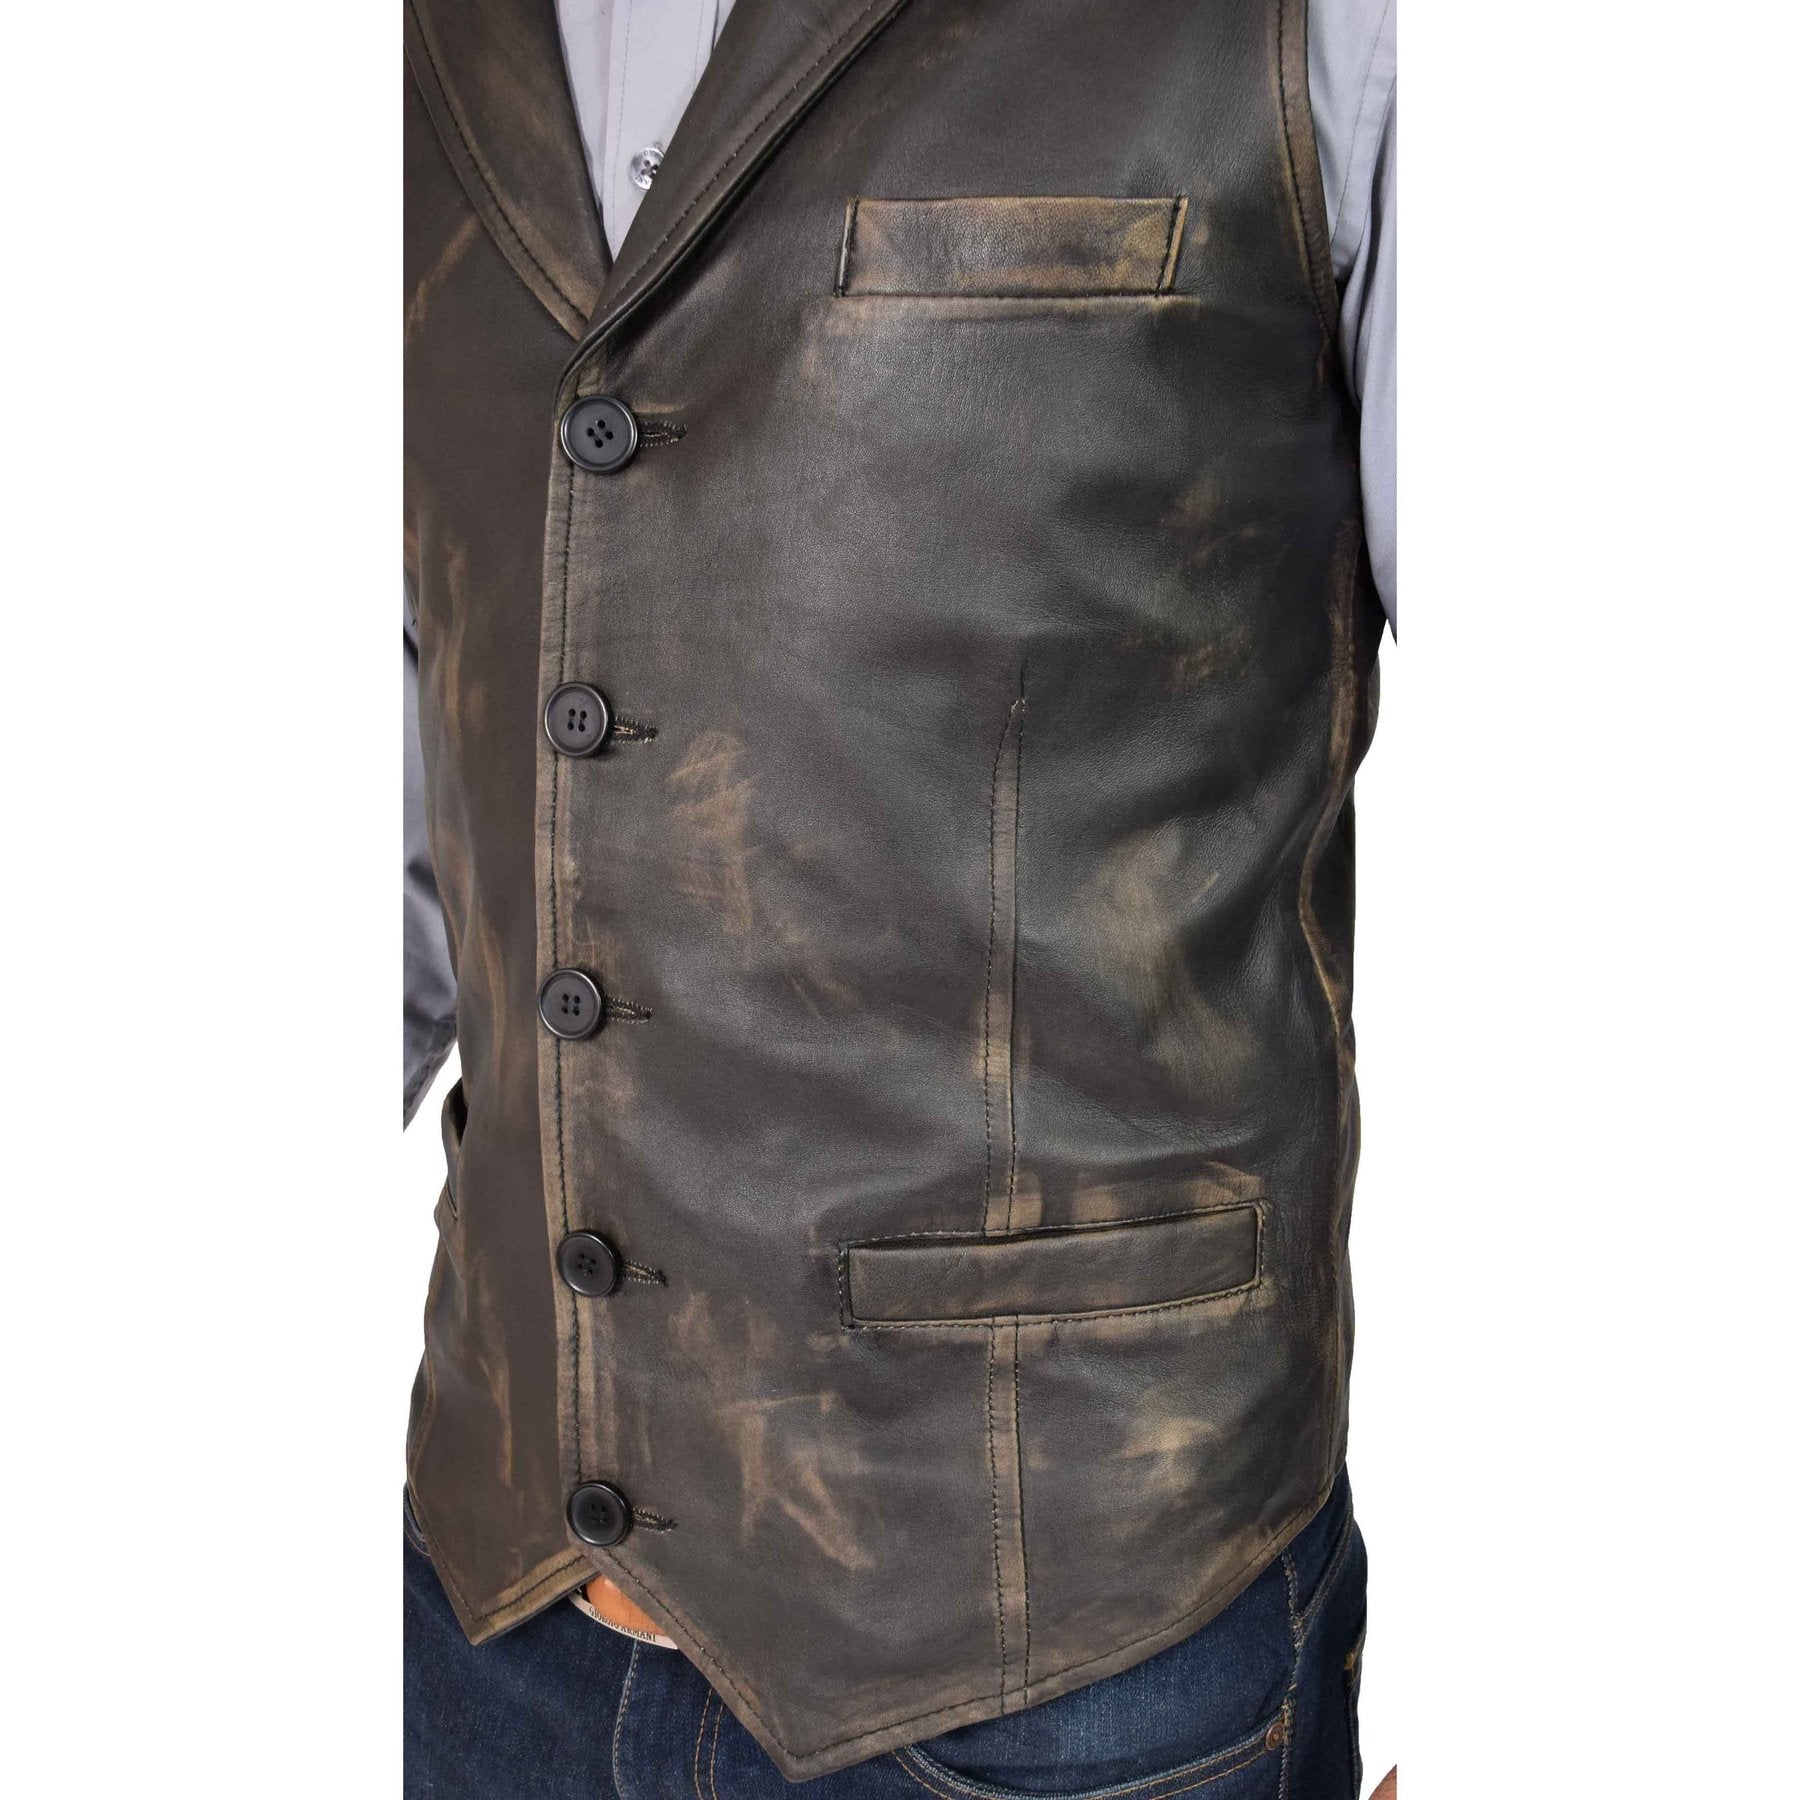 Spine Spark Men's Motorbike Soft Leather Rub Off Classic Style Vest